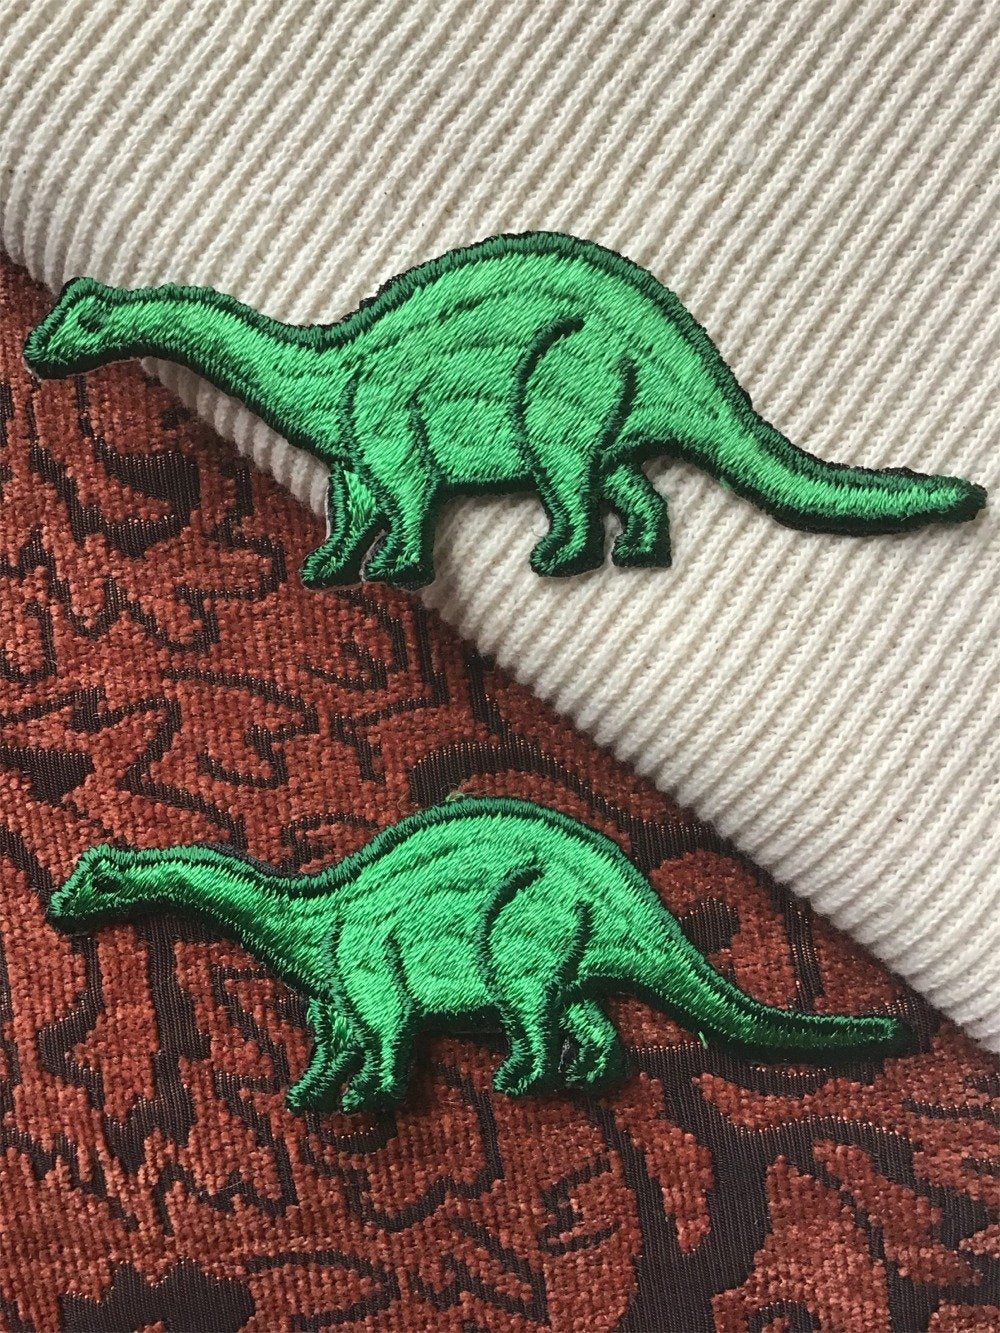 Vintage Green Dinosaur Embroidery Decorative Applique Iron-on Patches #5078